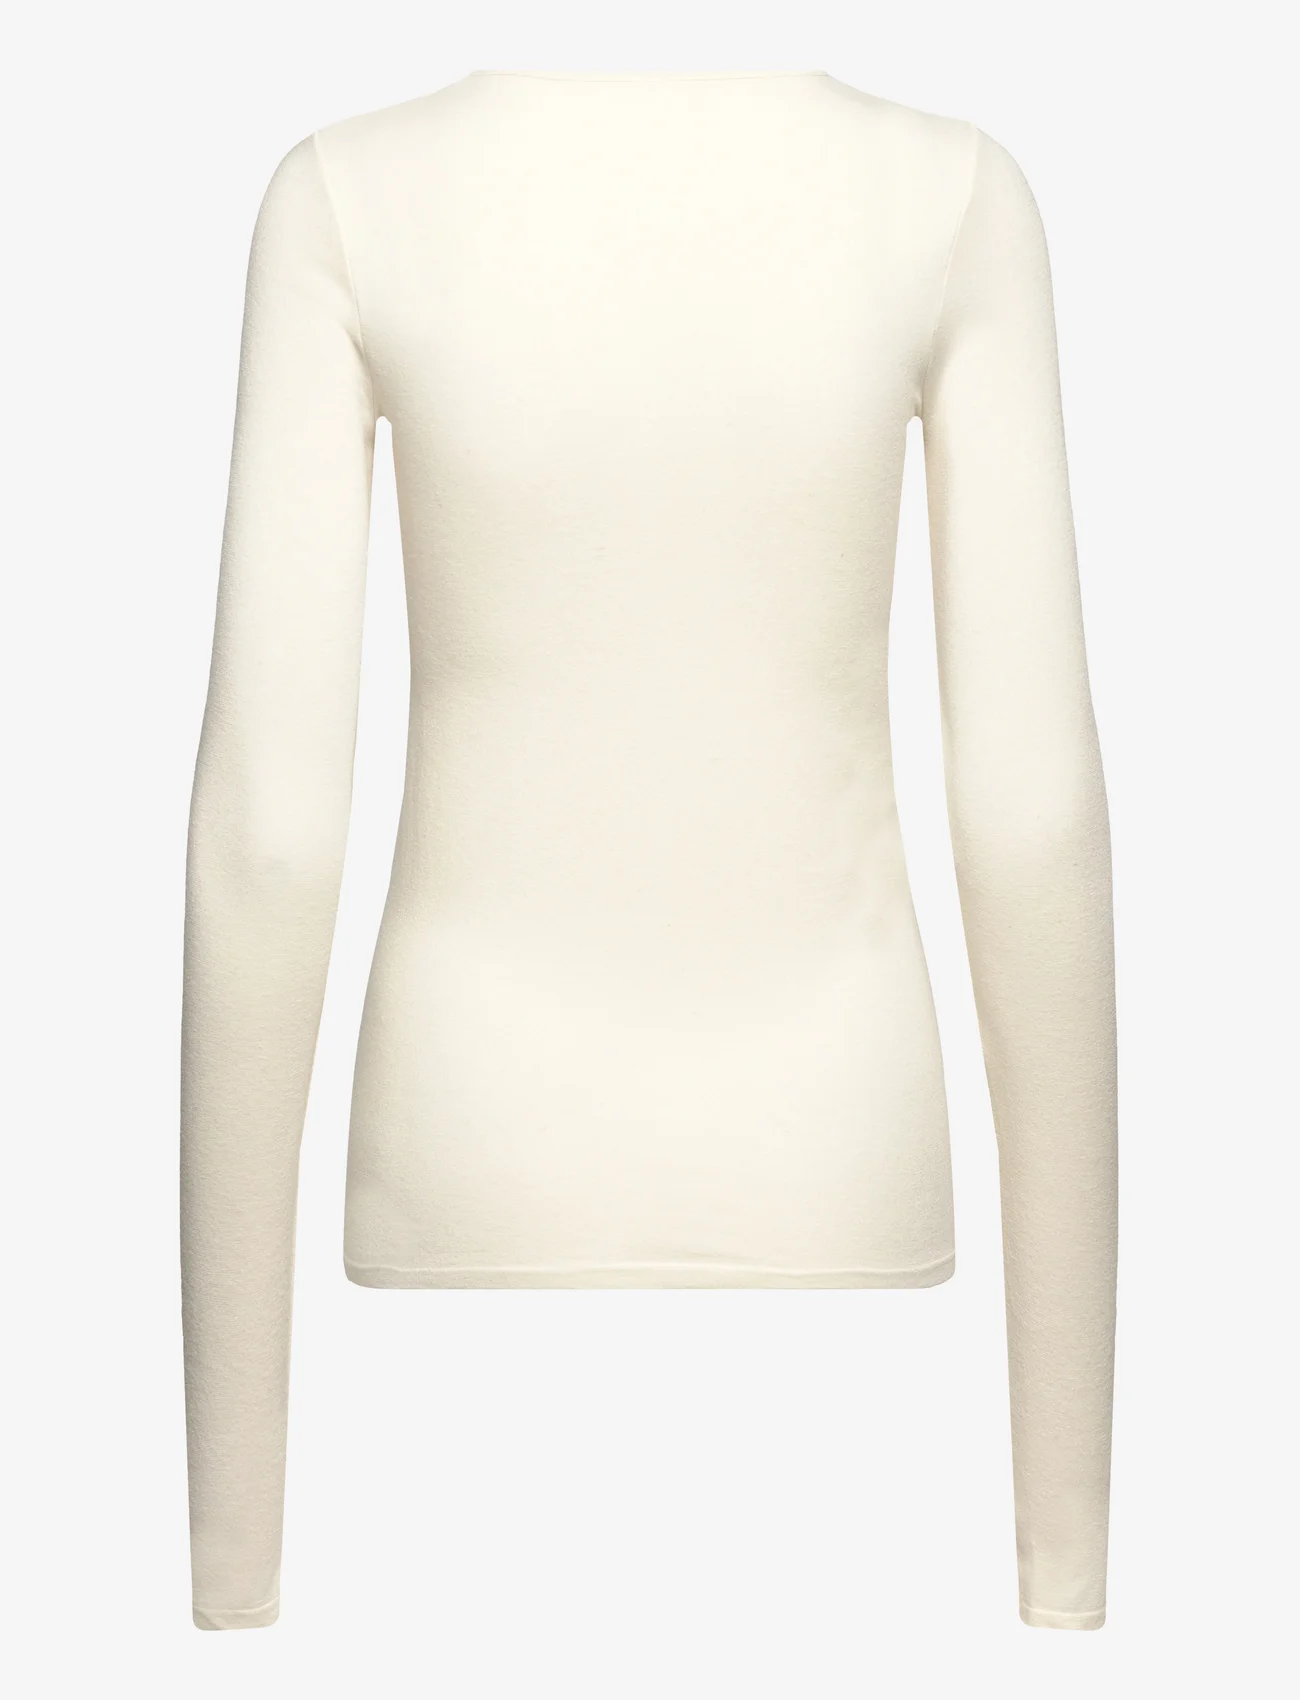 Swedish Stockings - Hillevi Cashmere Top - t-shirts & tops - ivory - 1